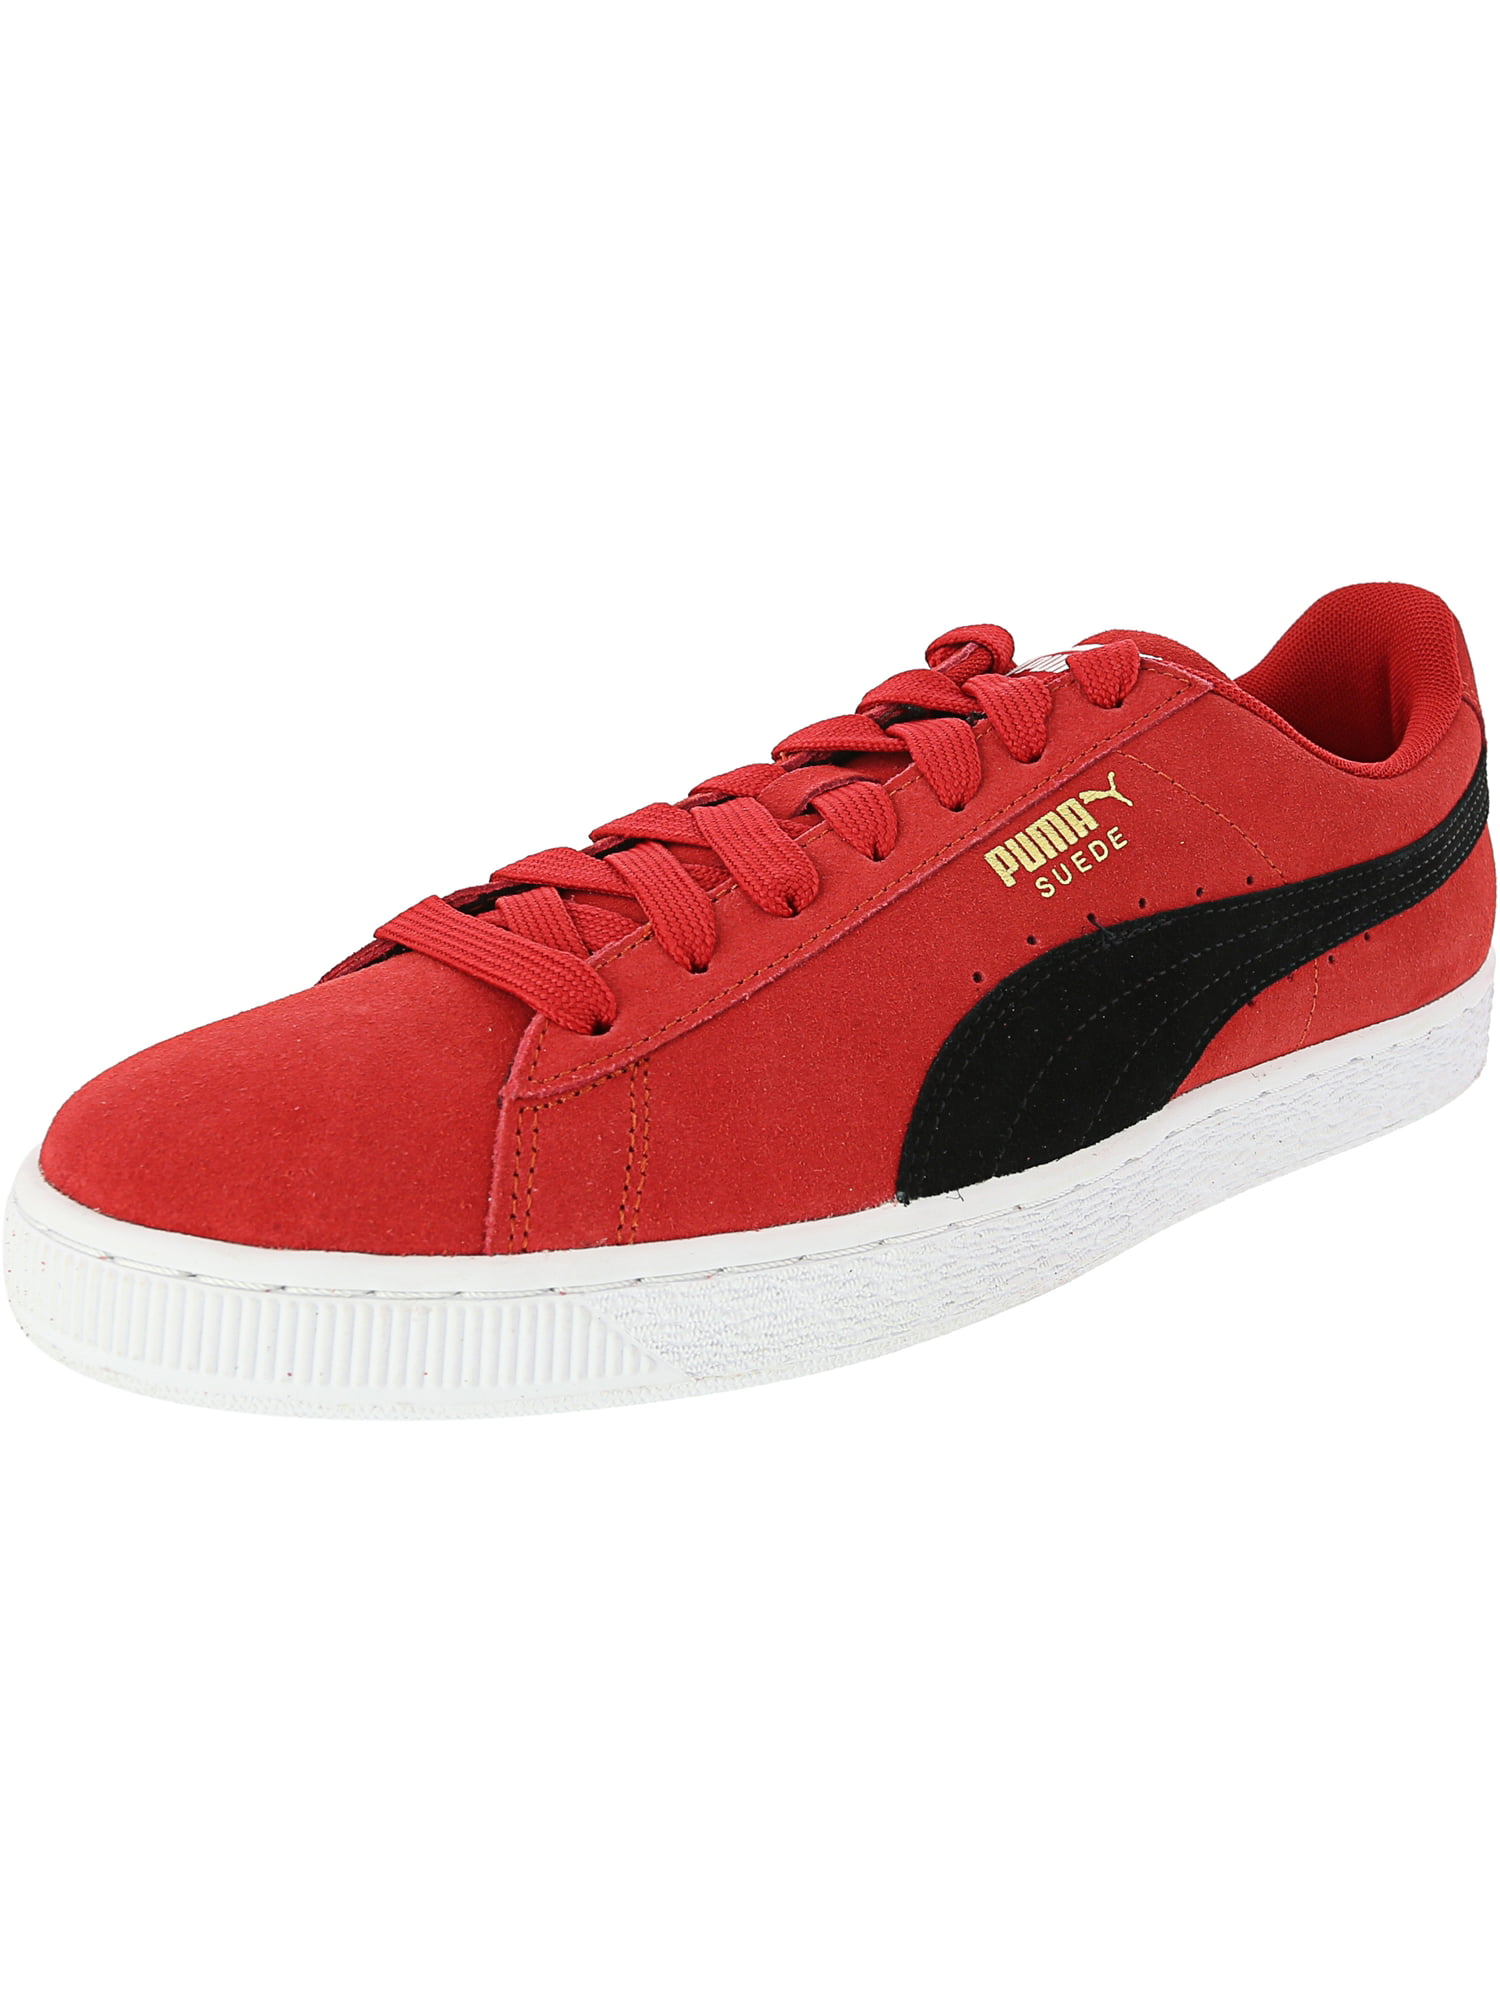 puma red and black sneakers